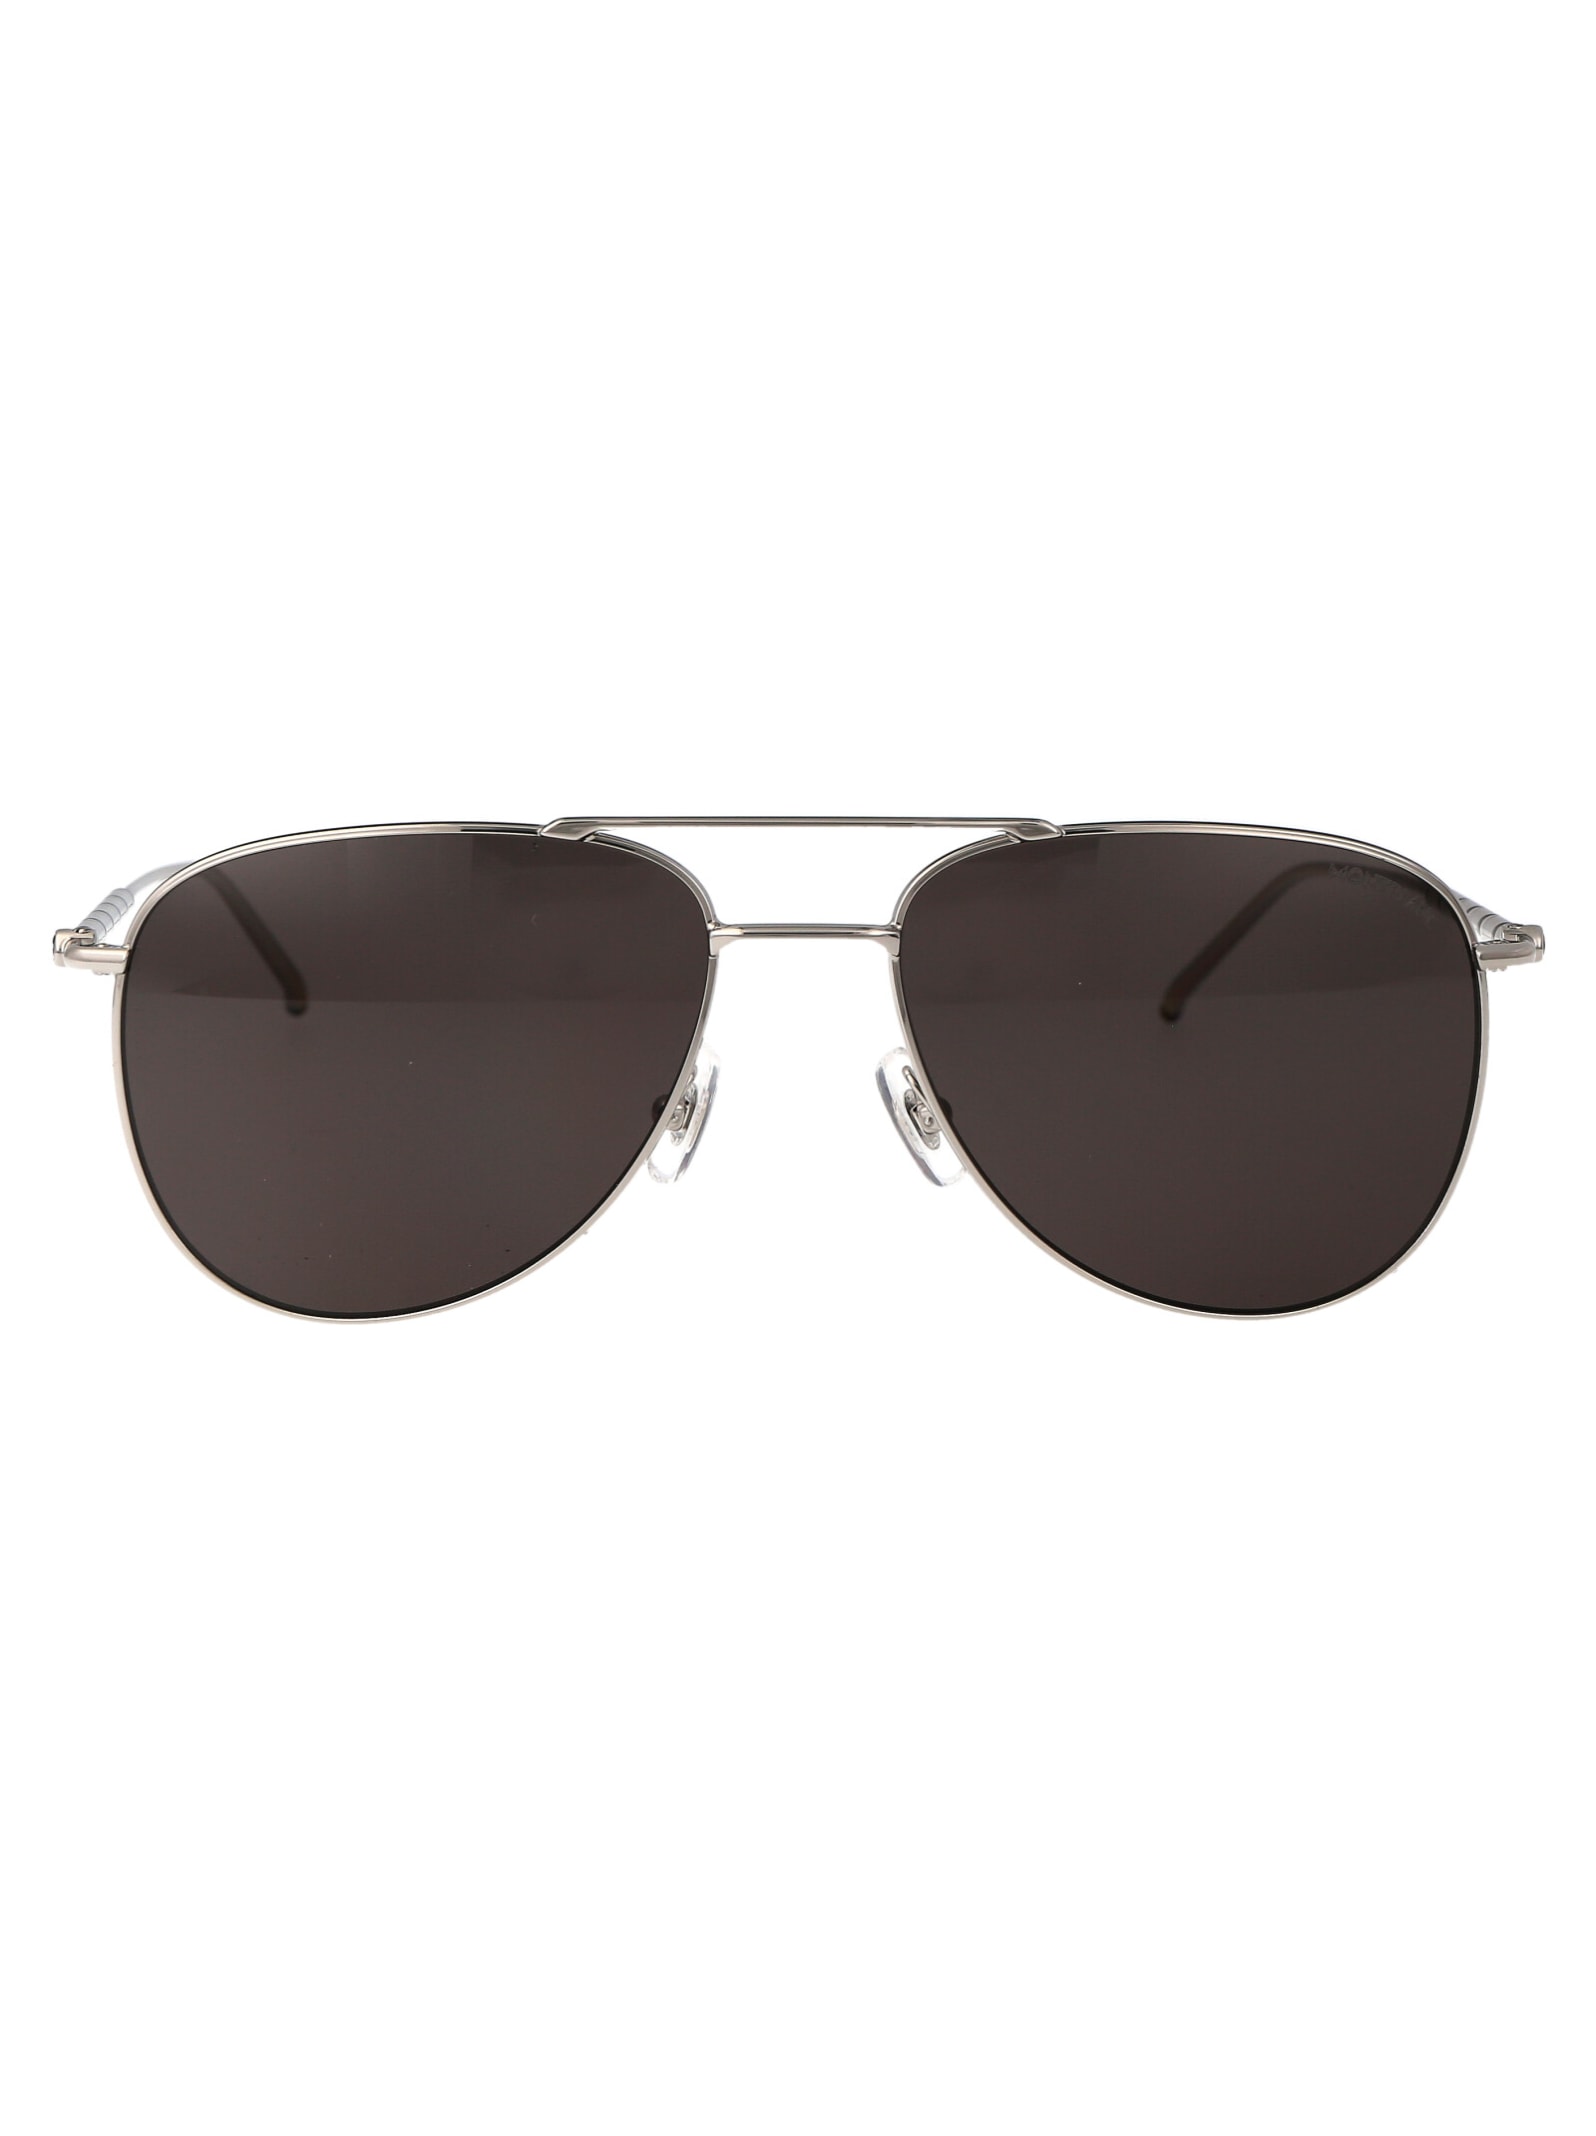 Montblanc Mb0311s Sunglasses In 001 Silver Silver Grey